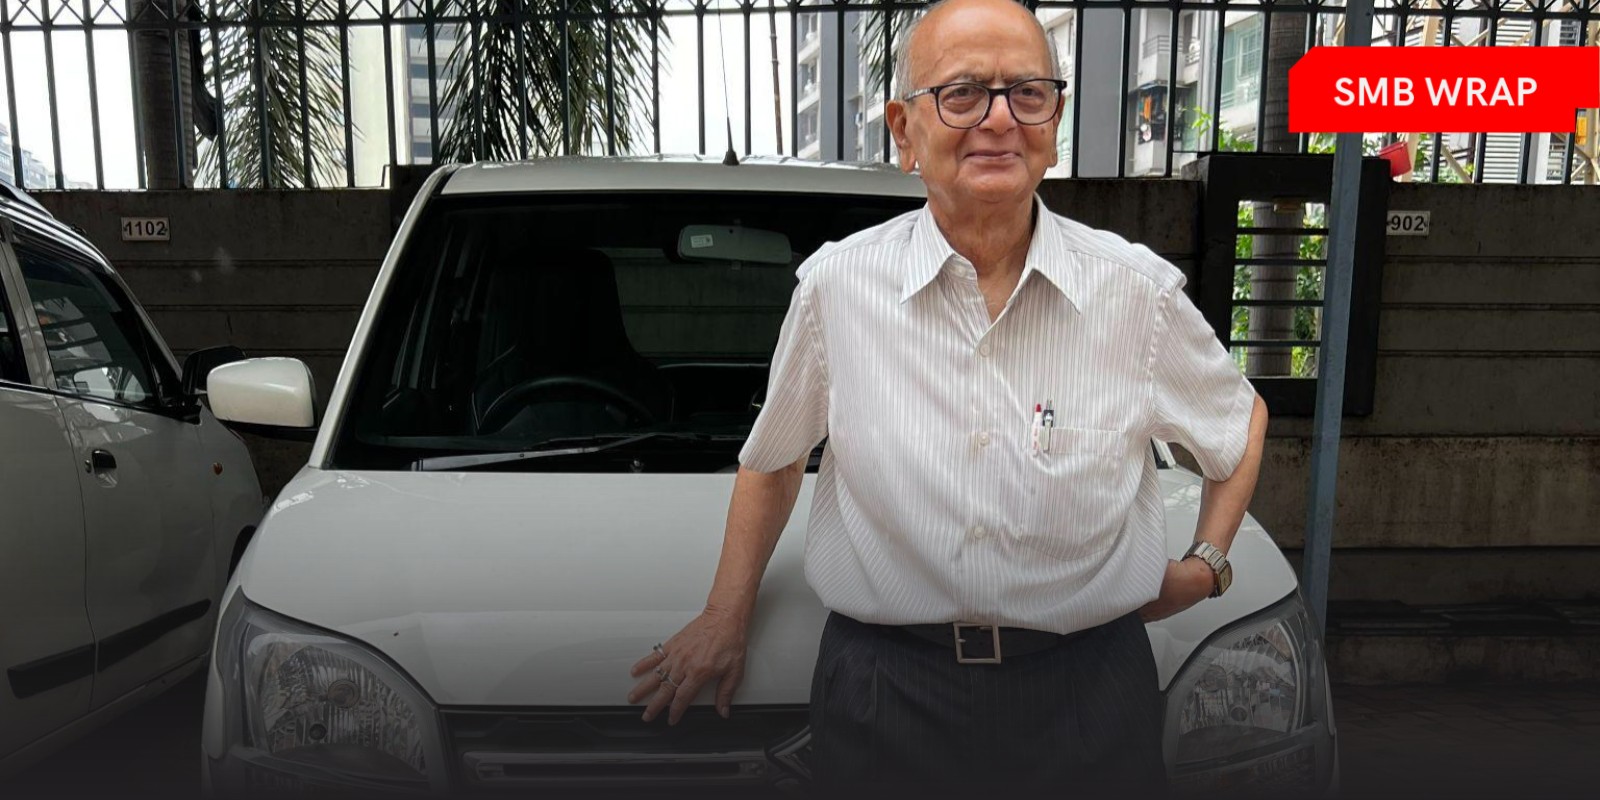 Meet the man who bought his first car at 85 and other top SMB picks of the week